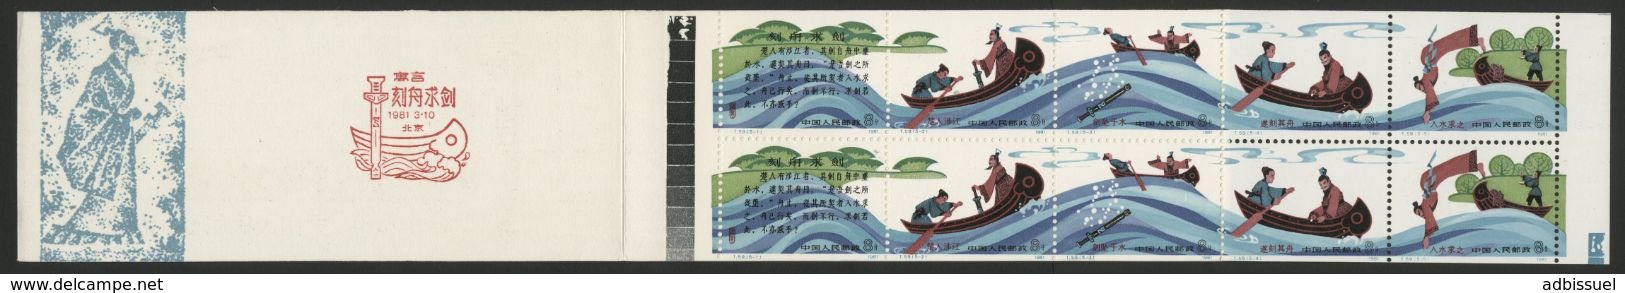 CHINA / CHINE 1981 / Y&T N° 2402 To 2406a (STAMP BOOKLET (CARNET)) ** MNH / Value 60 €. VG/TB. - Ungebraucht